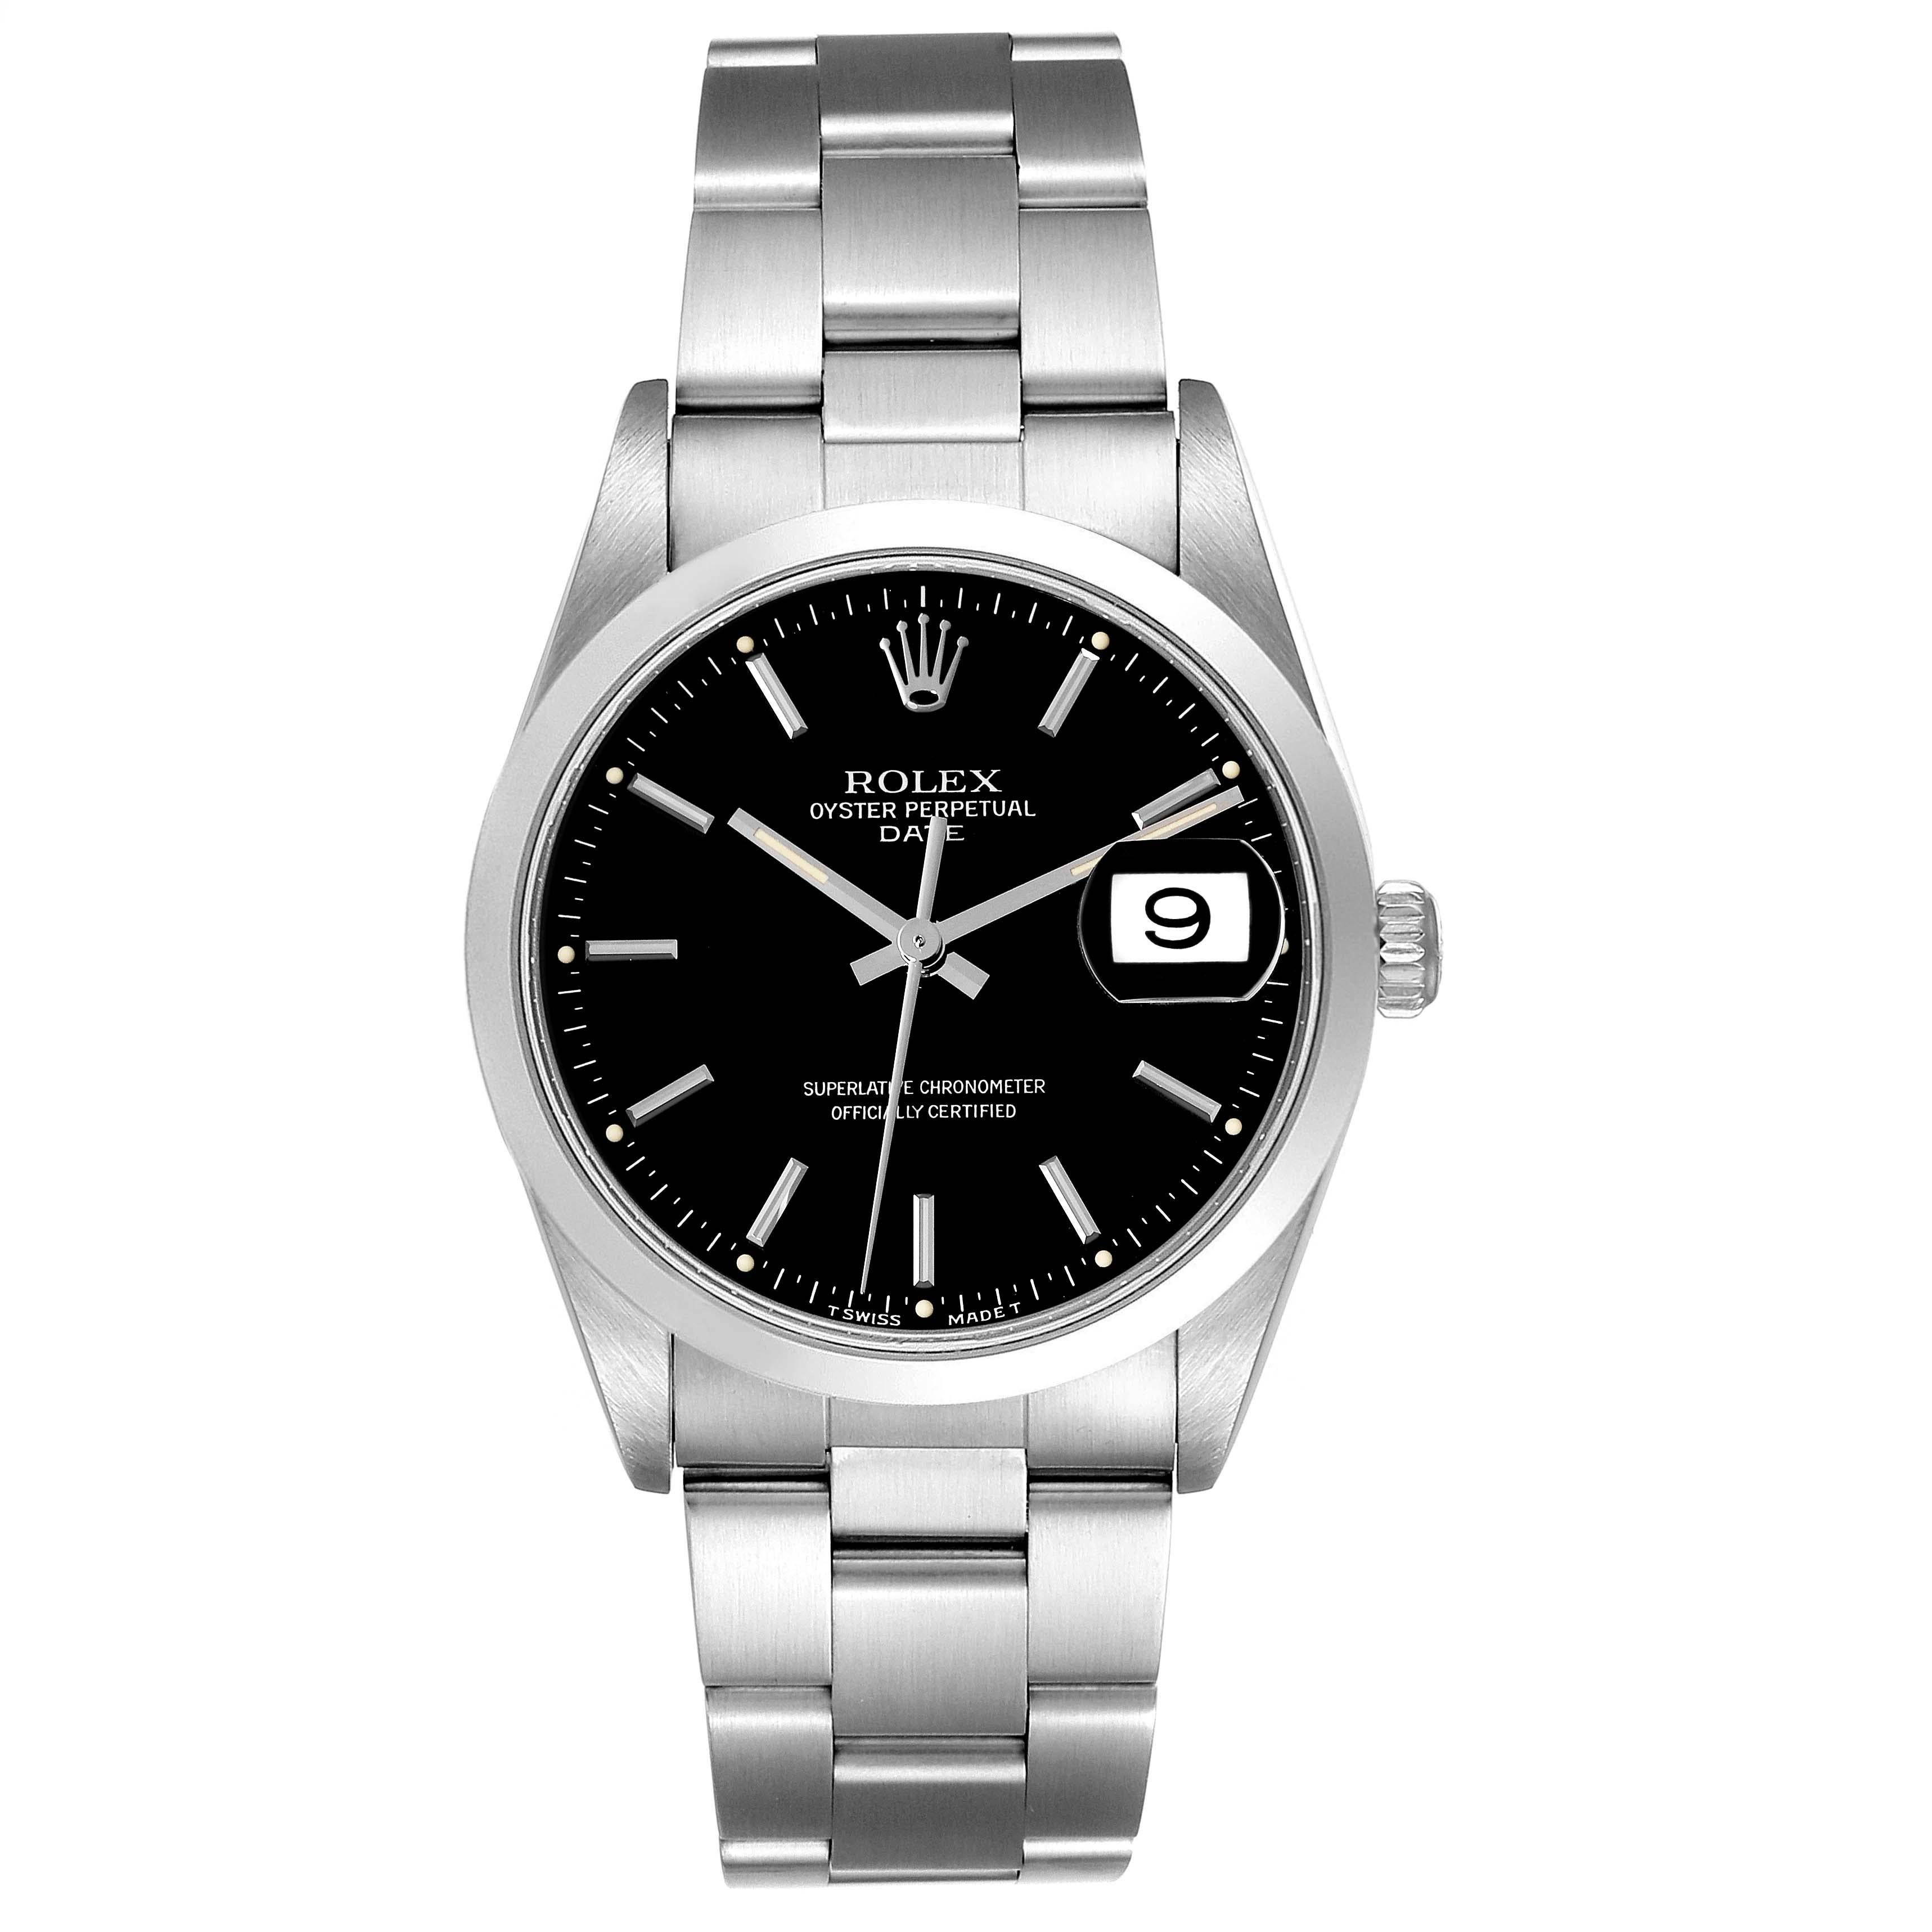 Rolex Date Black Dial Oyster Bracelet Steel Mens Watch 15200. Officially certified chronometer automatic self-winding movement. Stainless steel oyster case 34.0 mm in diameter. Rolex logo on the crown. Stainless steel smooth domed bezel. Scratch